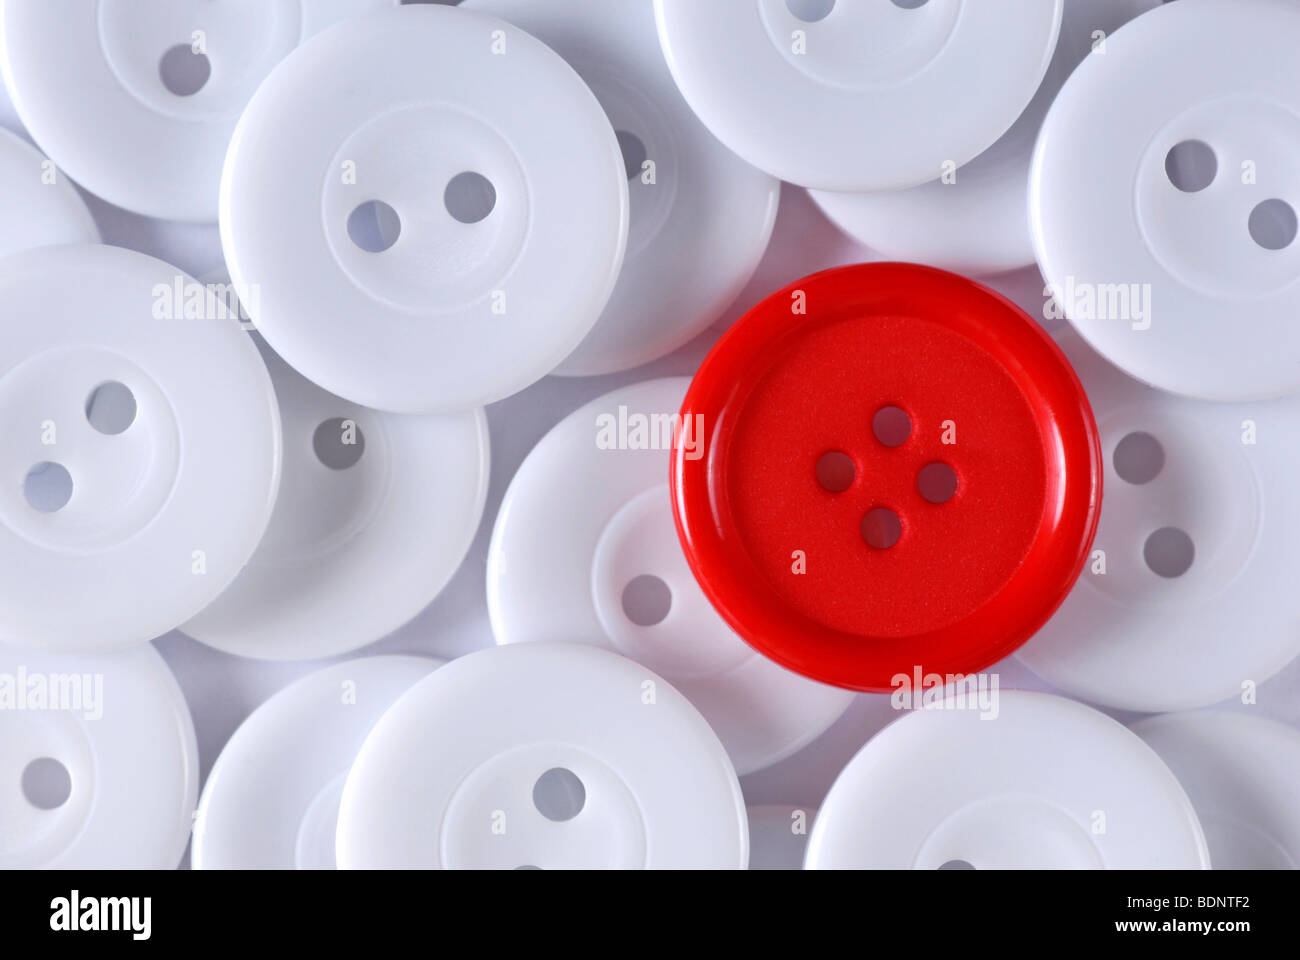 Red button under many white buttons, symbolic image for being different Stock Photo